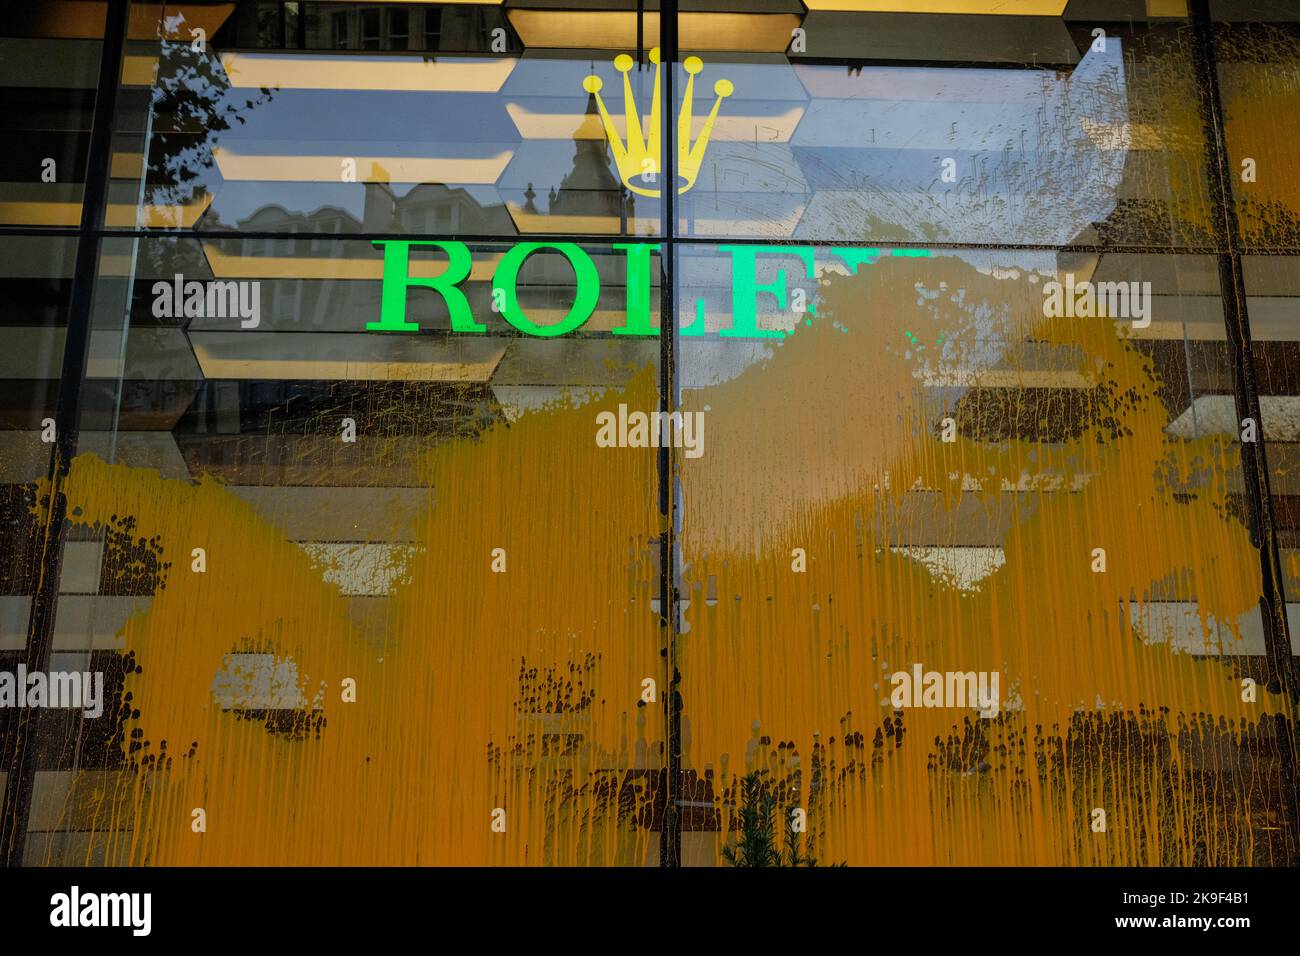 London, UK. 28 OCT 2022. Just Stop Oil spray paints Rolex store in Knightsbridge claiming time is running out. Credit: Joao Daniel Pereira/Alamy Live News Stock Photo